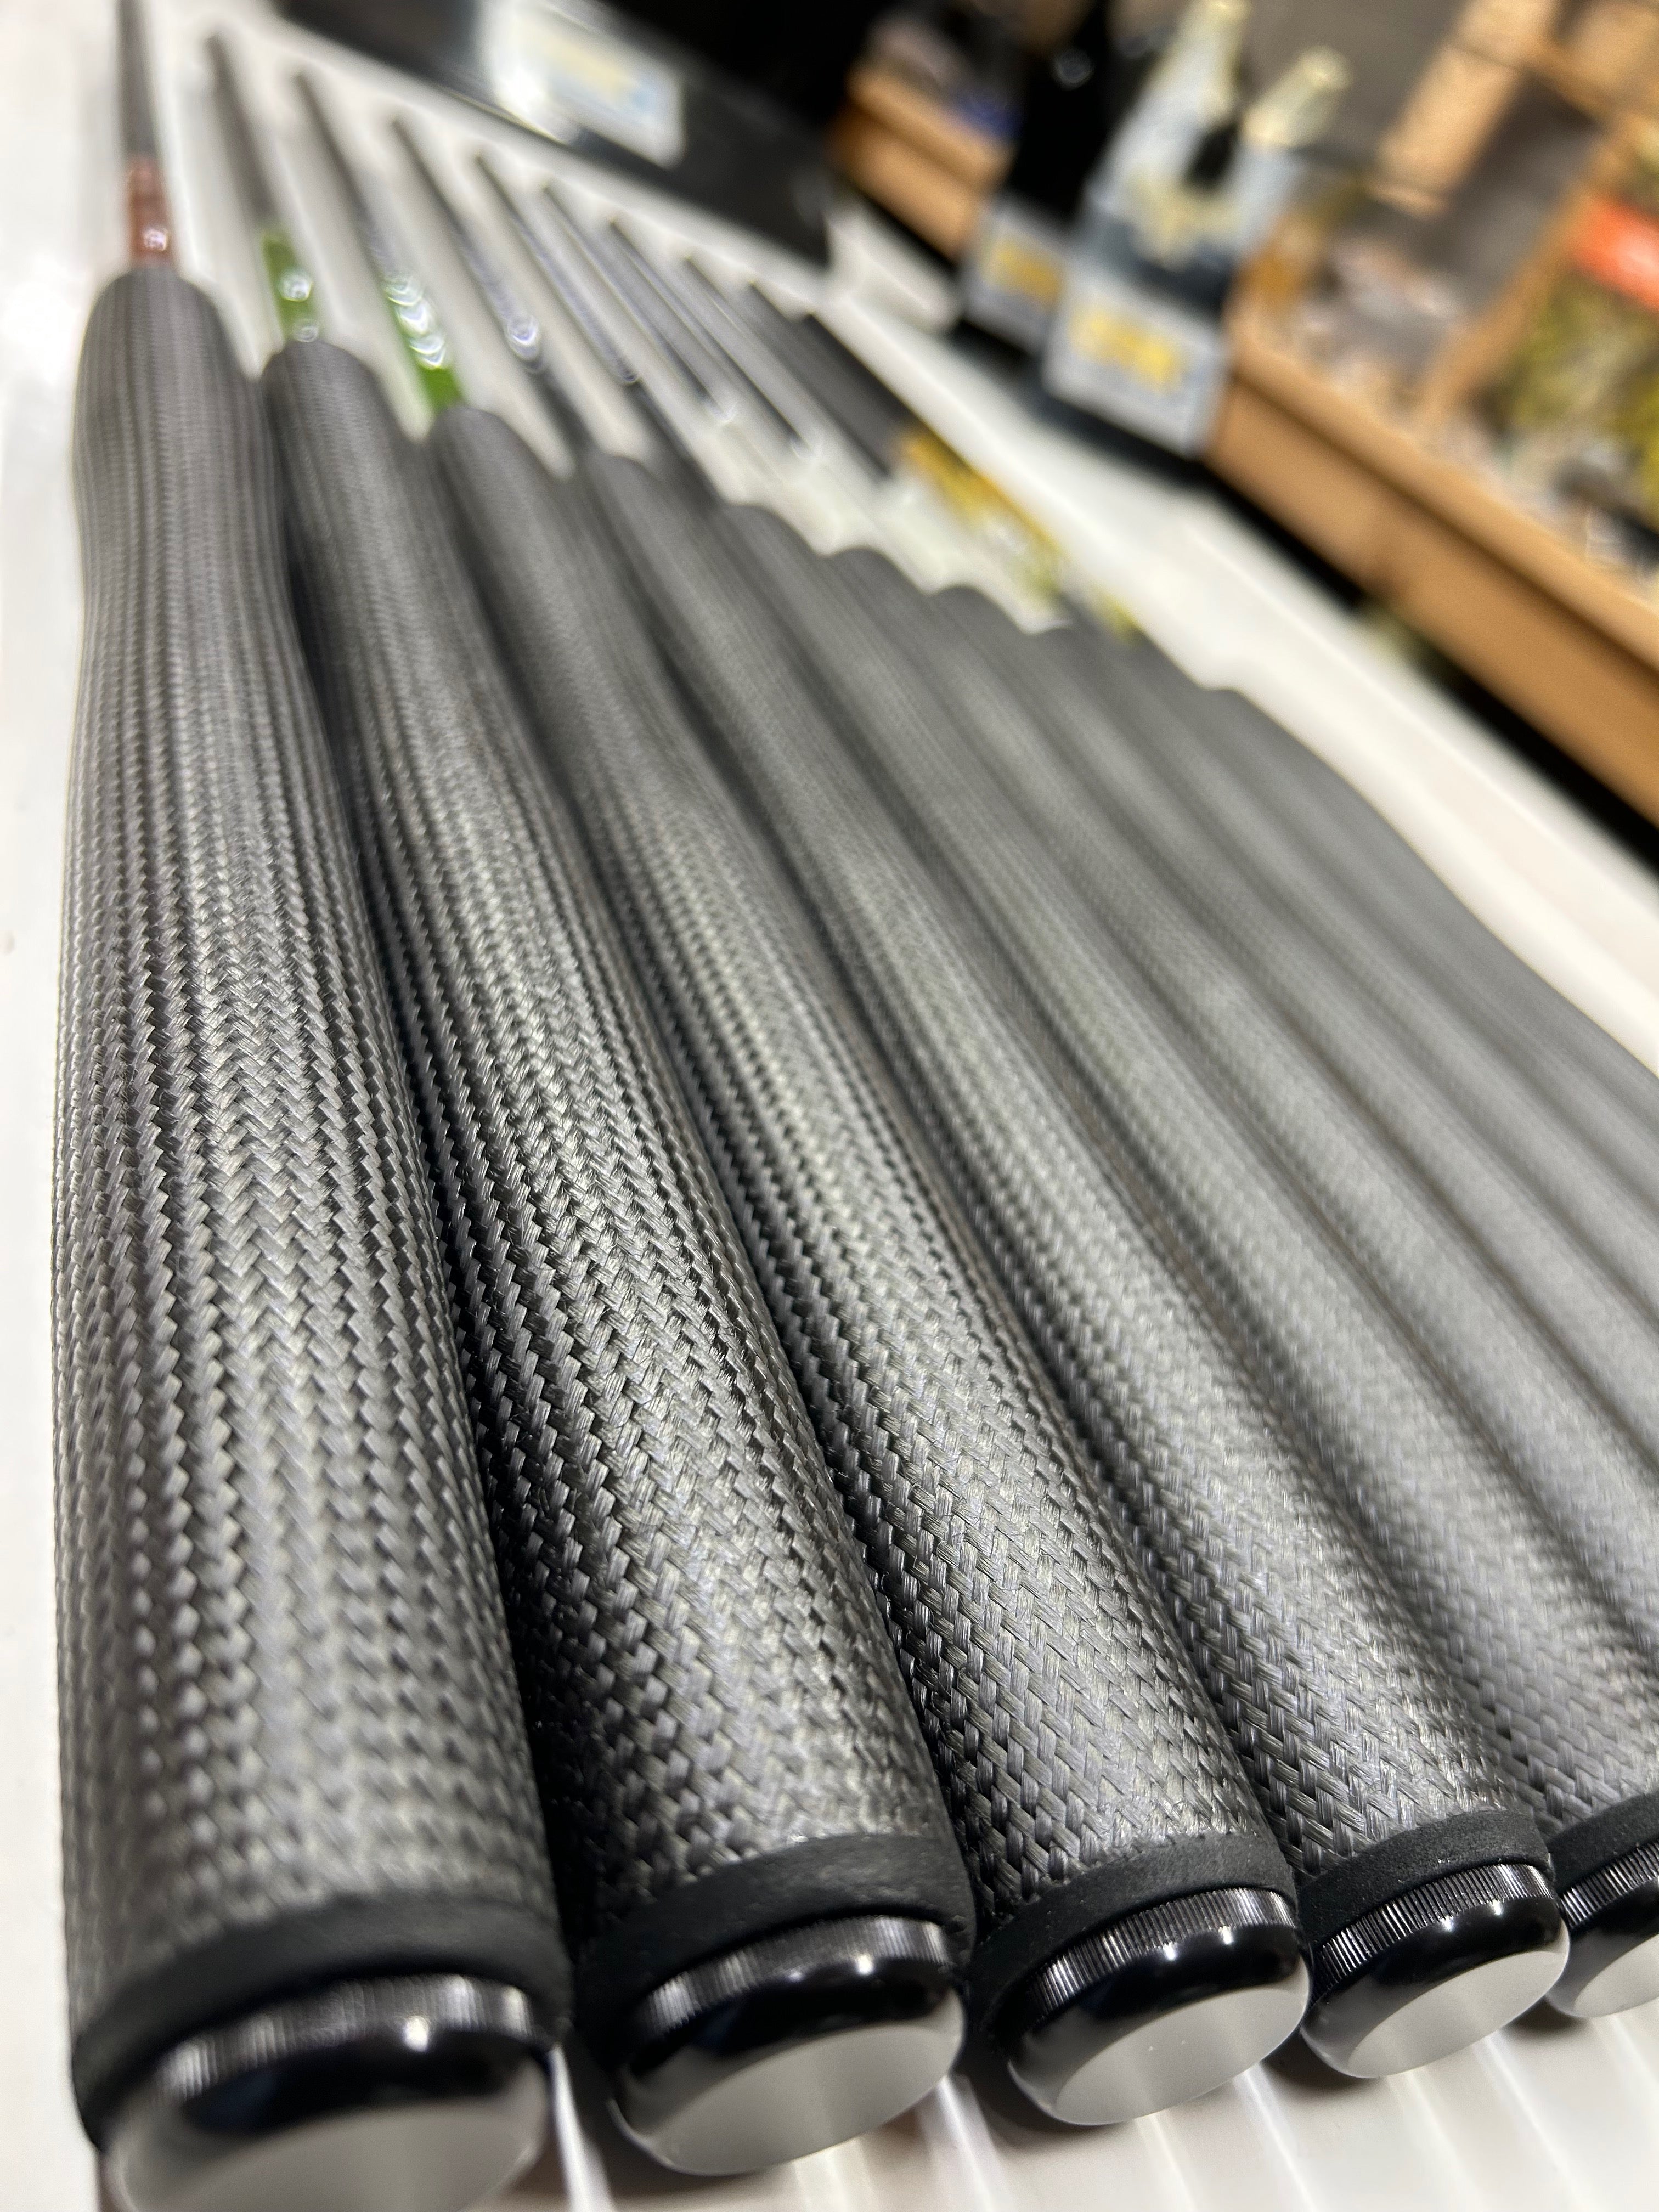 ZX4-PRO 395CM GEN 1.5-- BLACK FRIDAY SALE LIVE NOW-- All remaining rods are $379!!